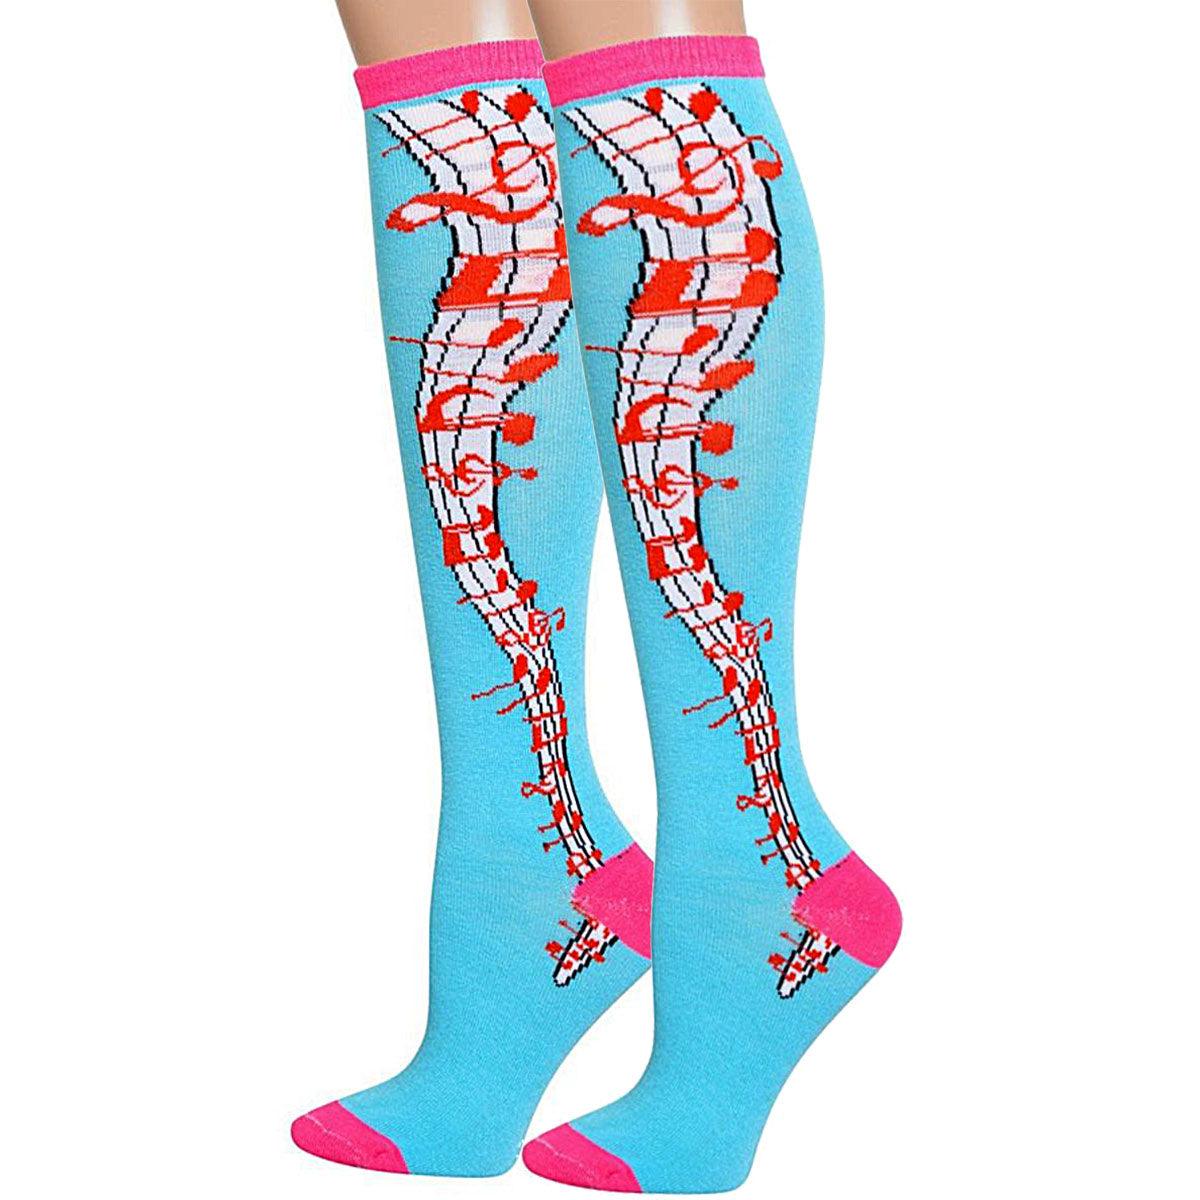 Aqua Musical Notes Socks for Women: Accessories in Harmony